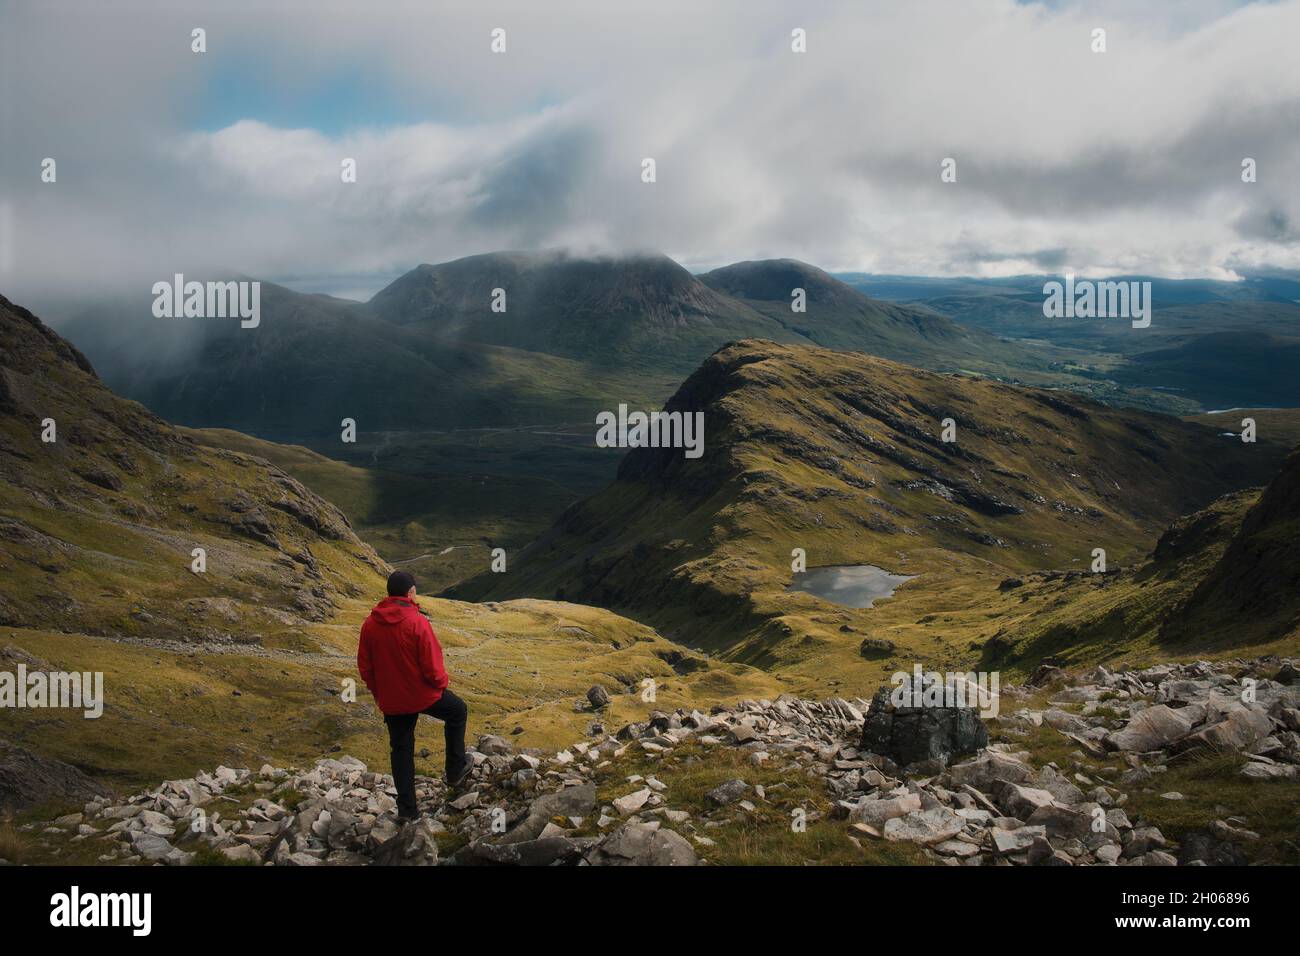 A hiker at the top of the mountain views the magnificent landscape of the Isle of Skye. Bla Bheinn, Isle of Skye, Scotland  Stock Photo